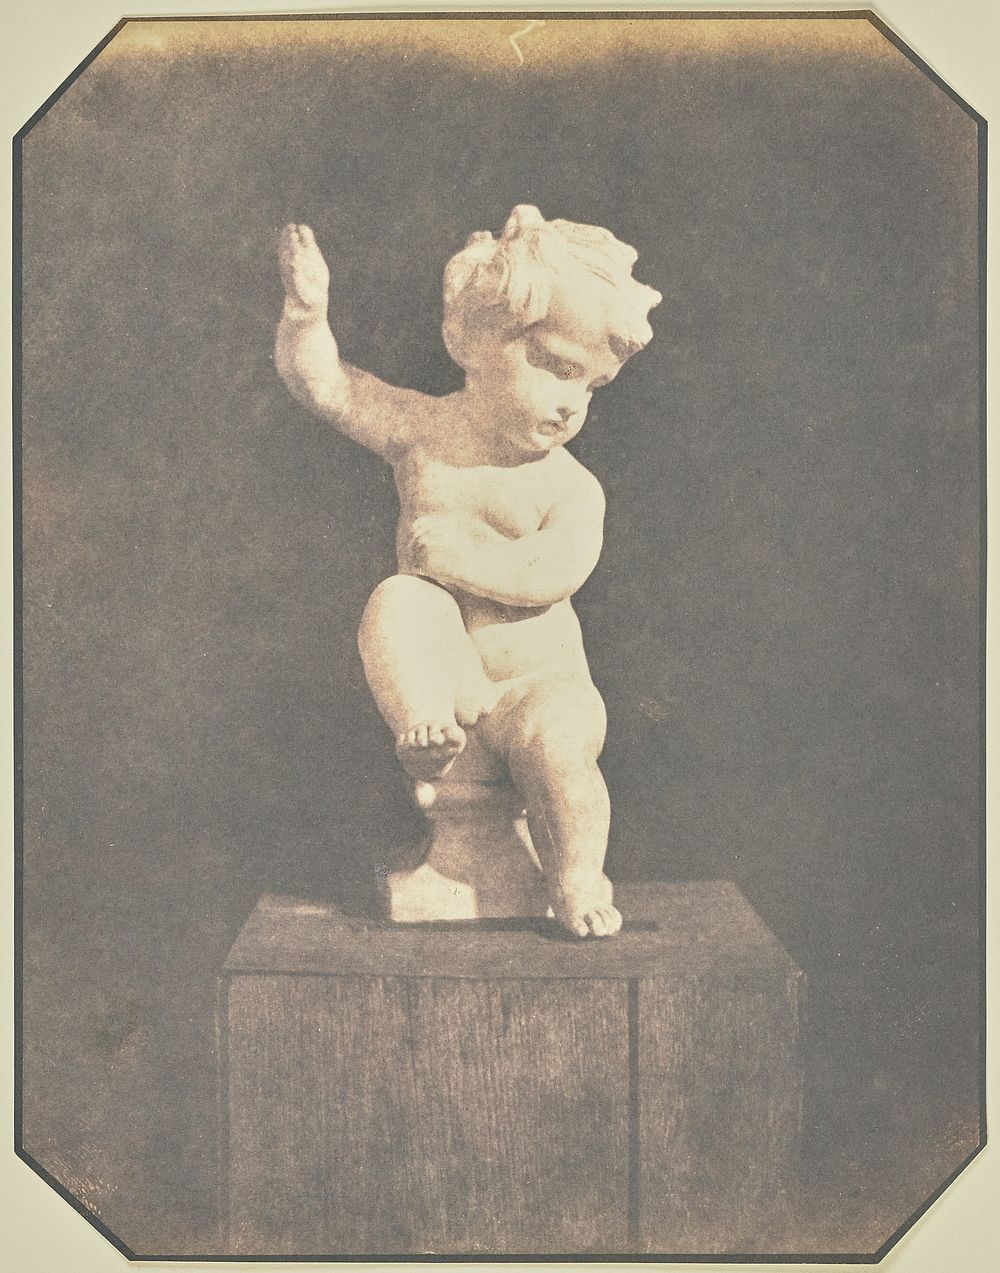 Statuette of a Boy with Raised Arm by Hippolyte Bayard